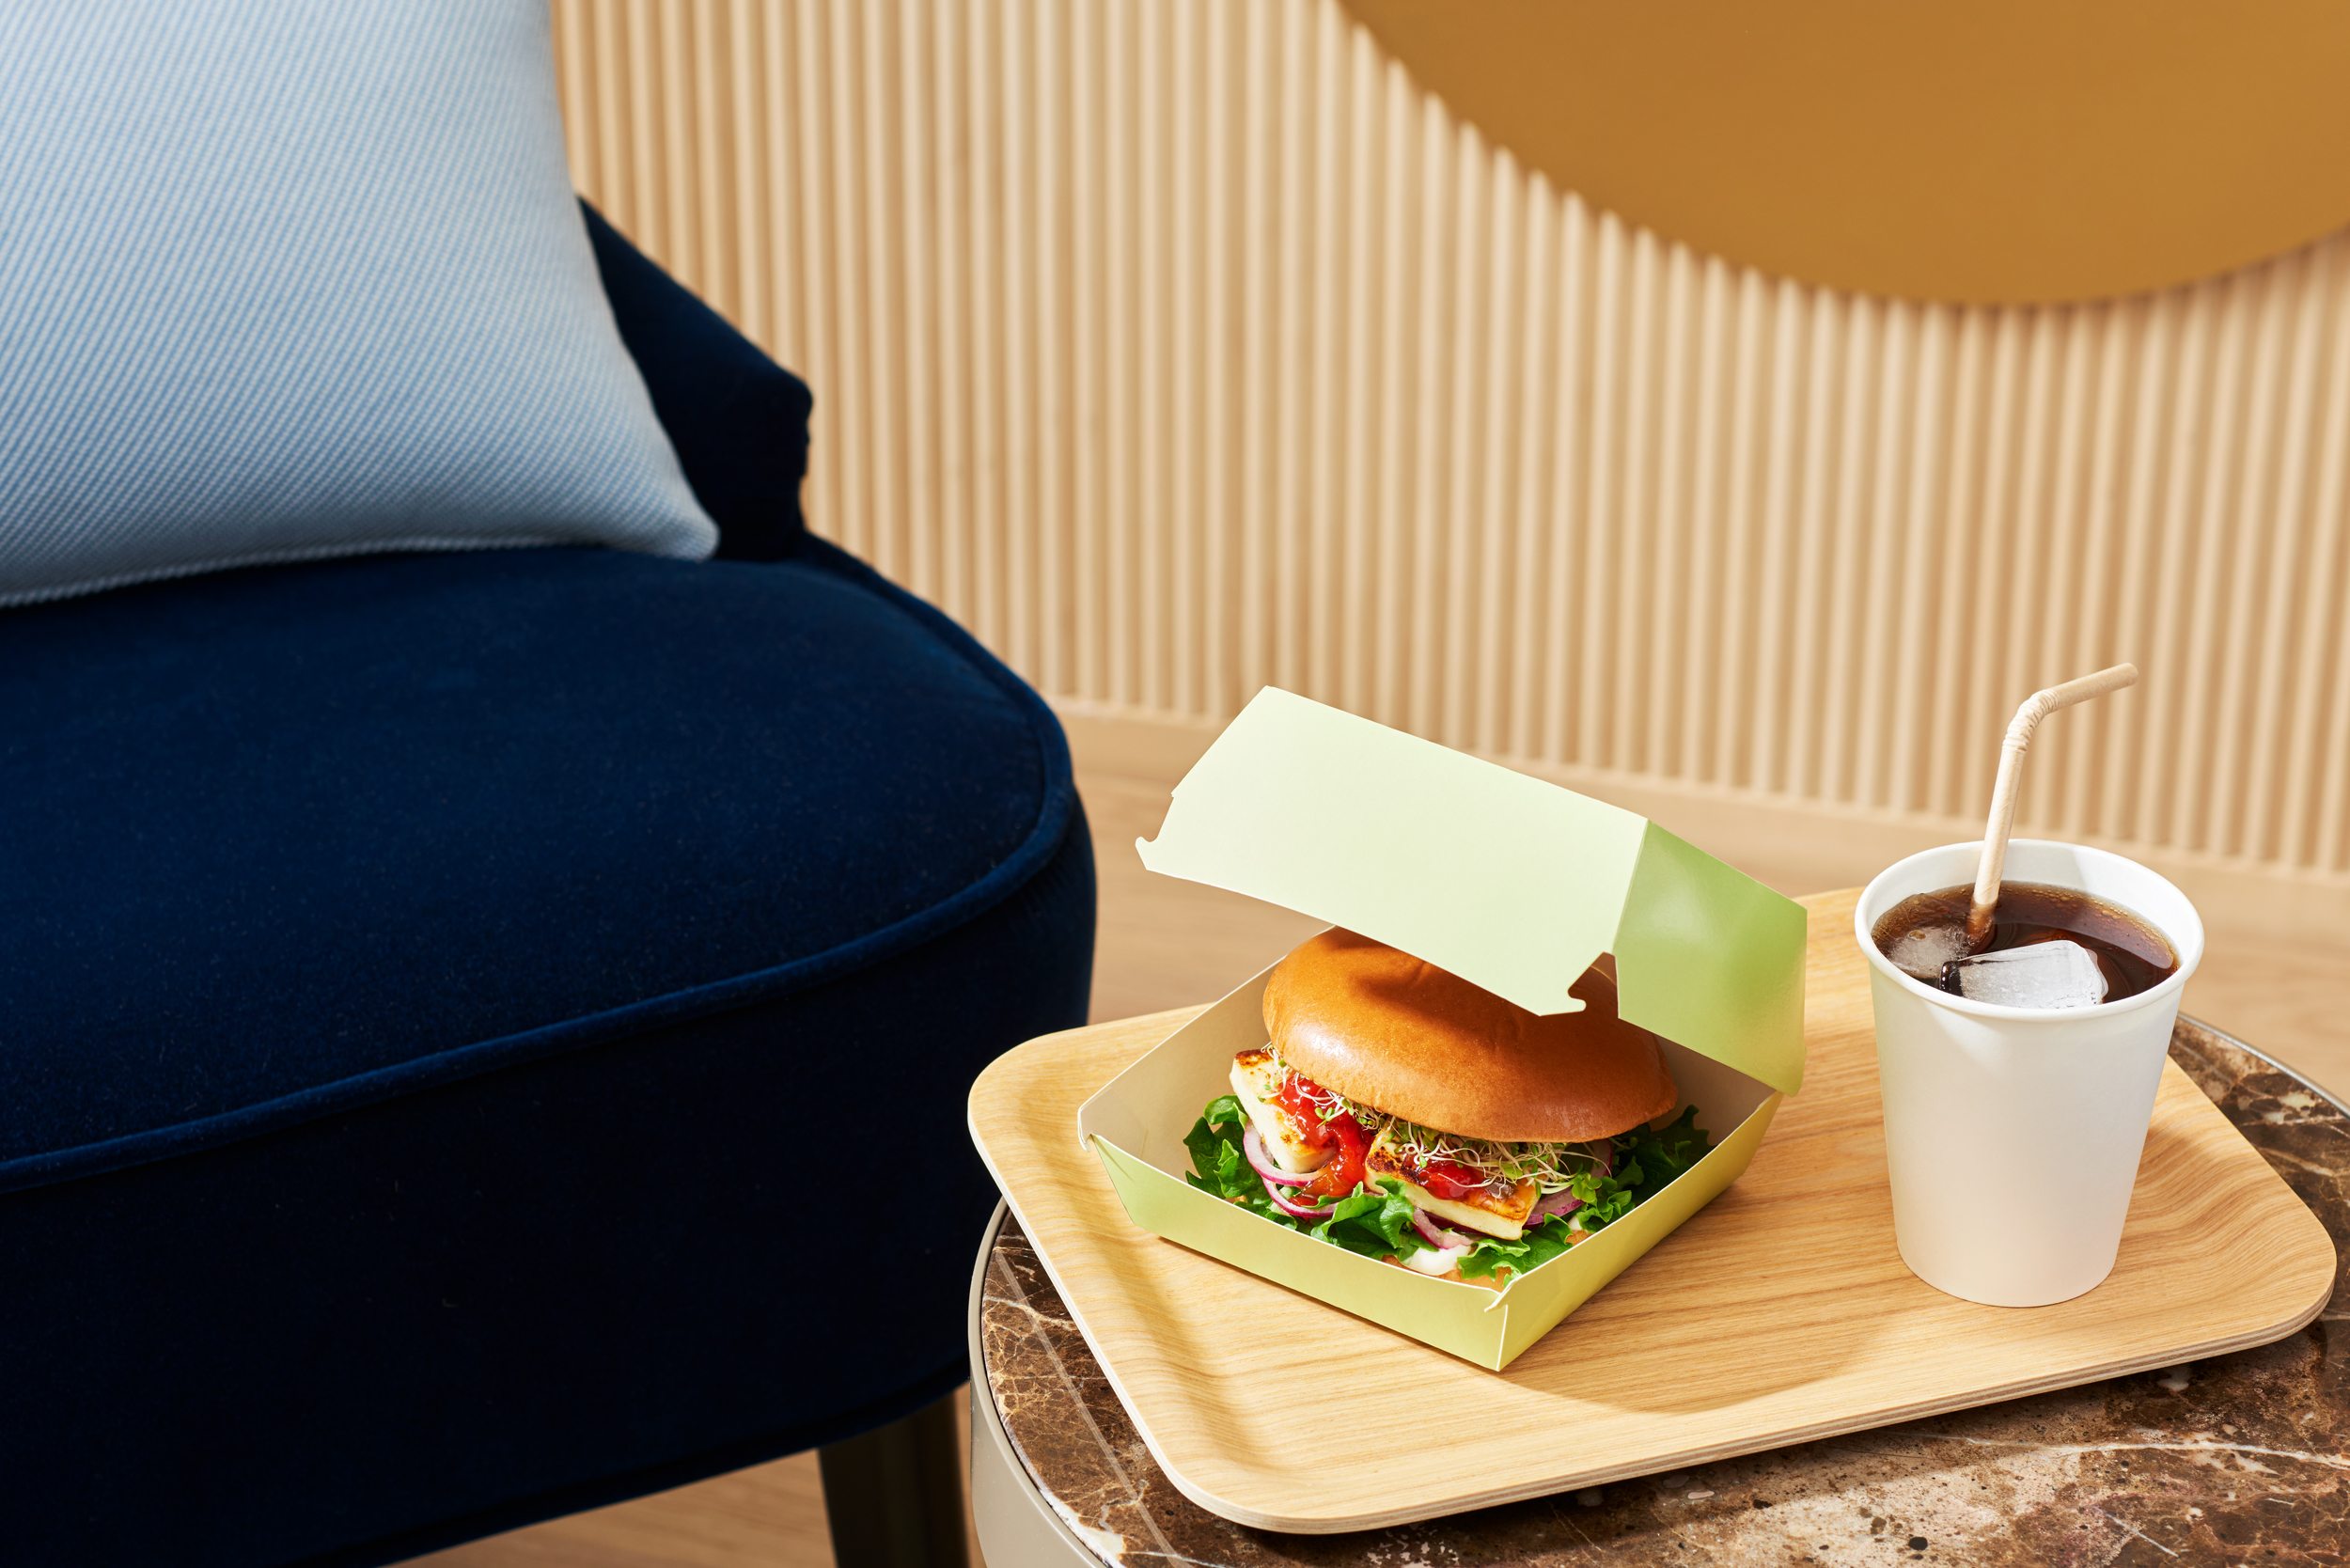 A_hamburger_and_a_soft_drink_on_a_wooden_tray_using_Stora_Ensos's_packaging_materials_by_Elina_Himanen